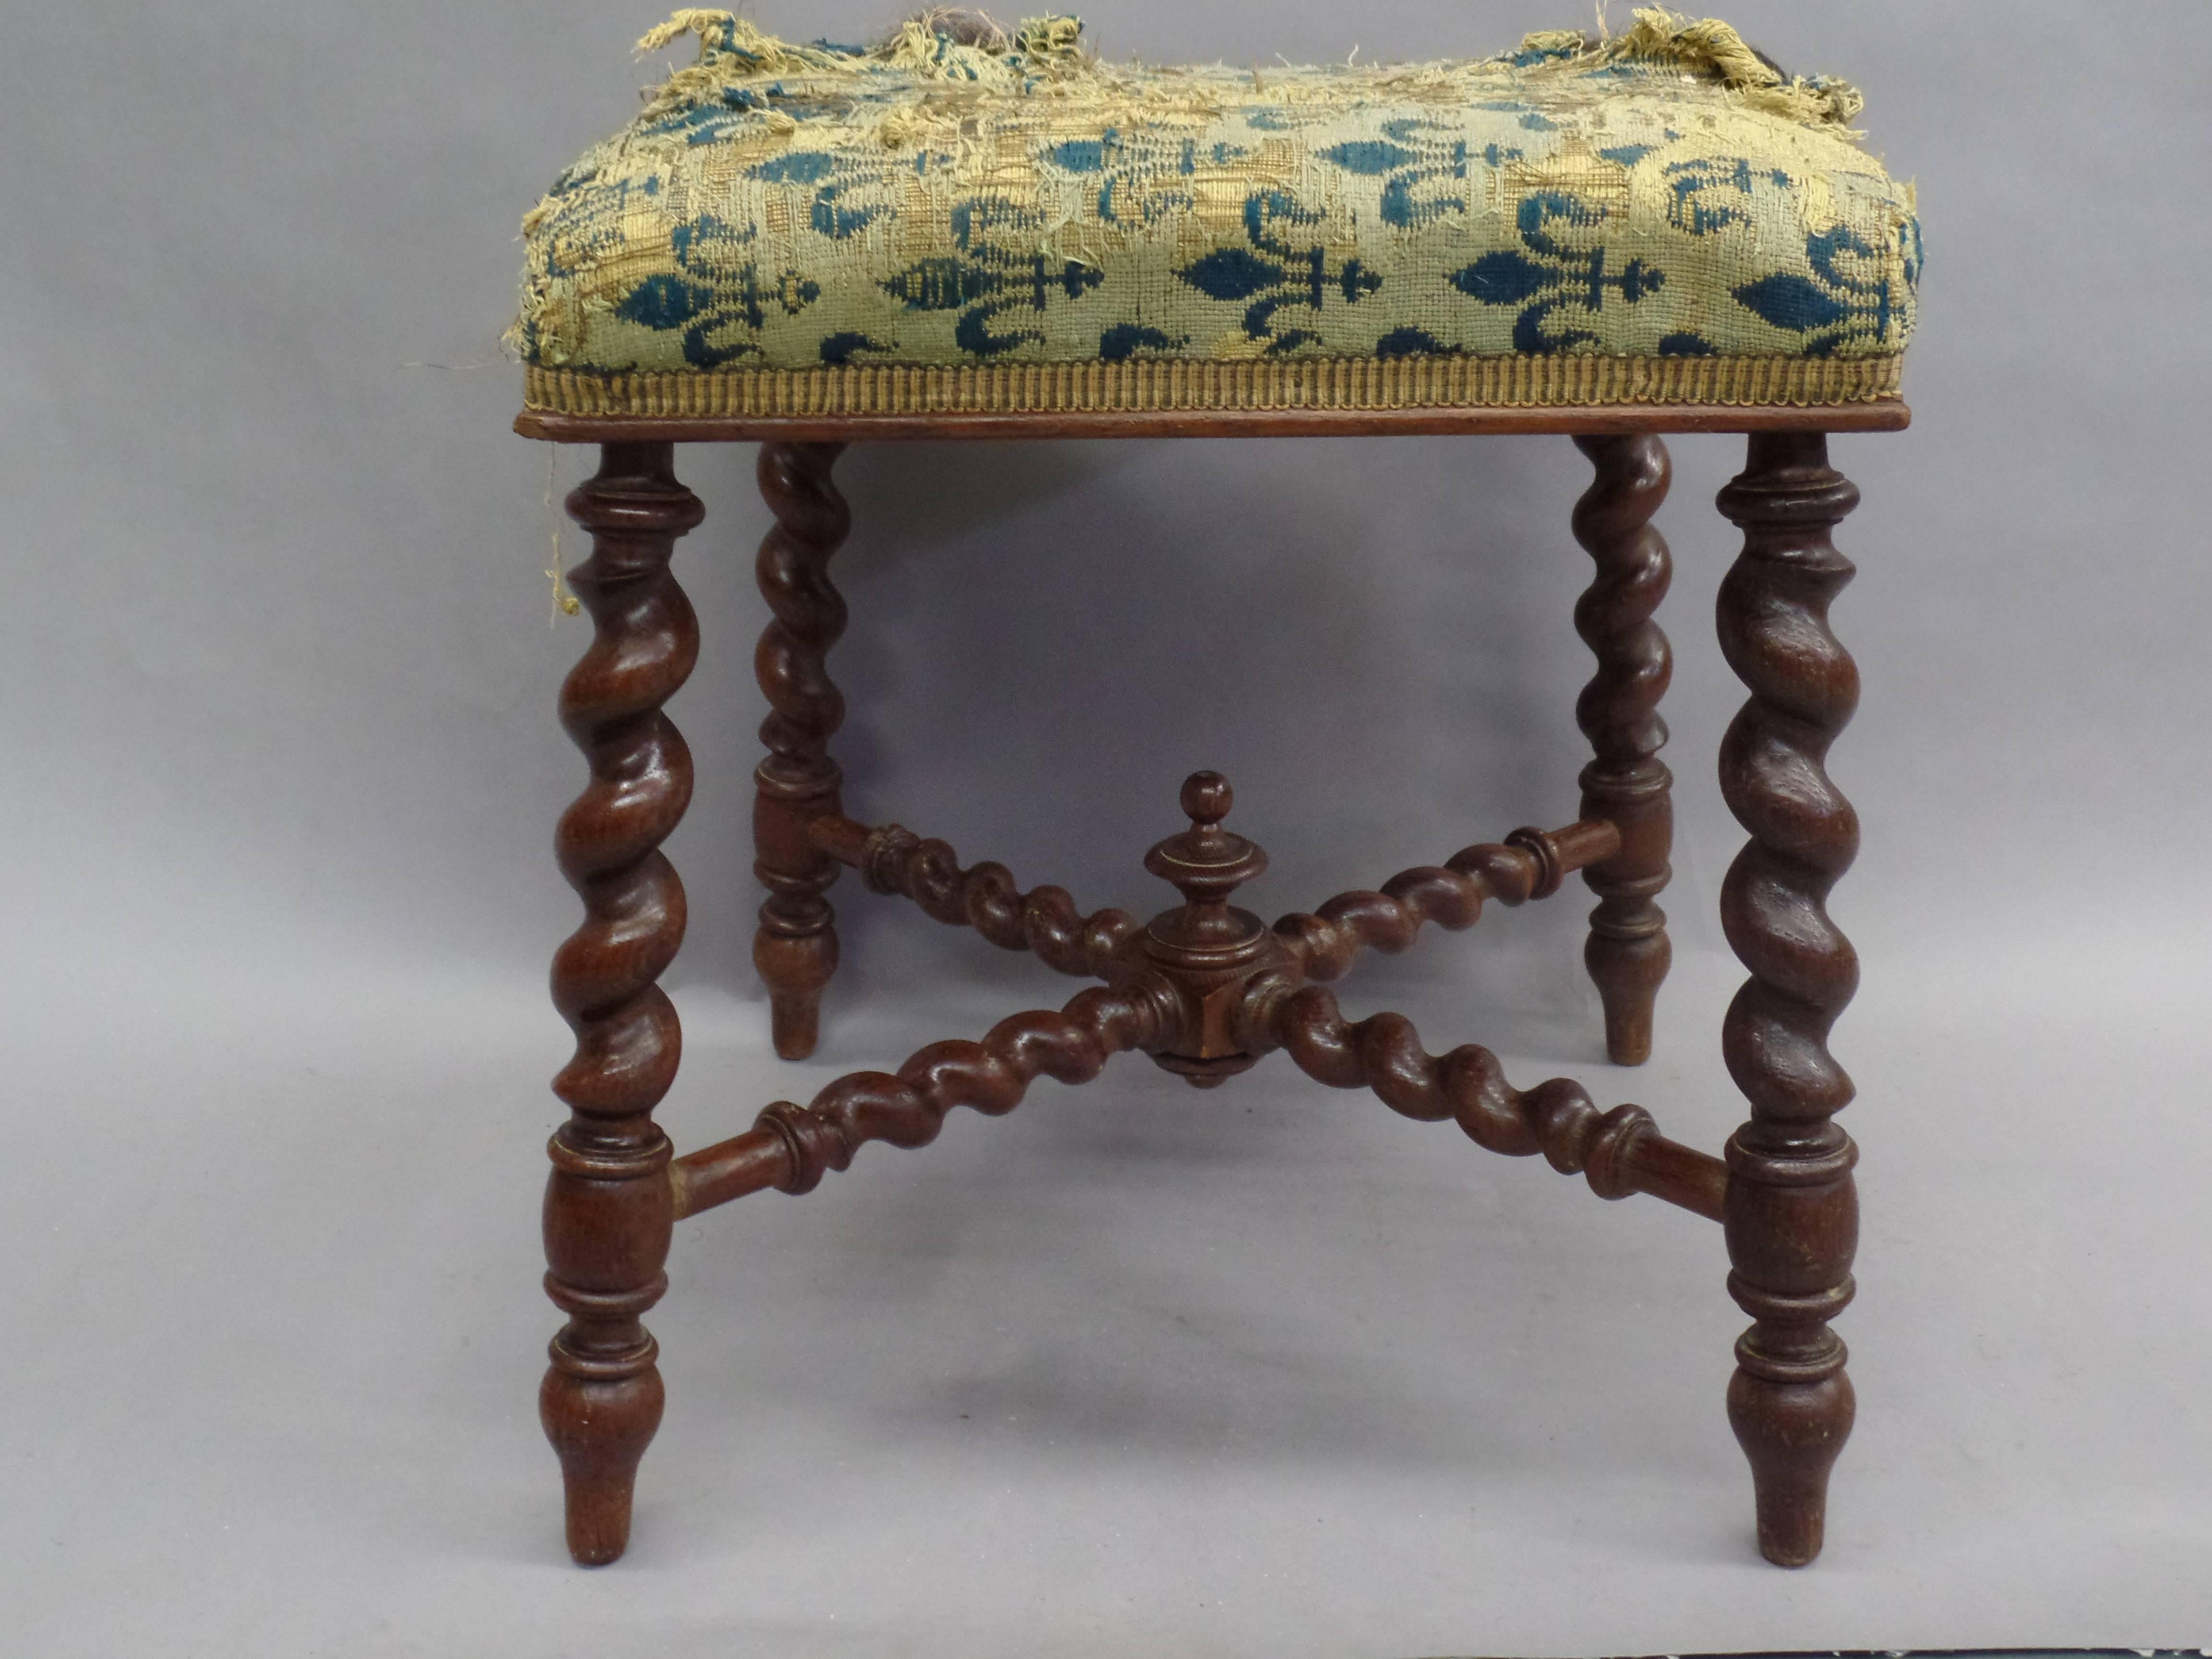 French bench or stool in the style of Louis XIII with legs and stretcher in the form of a barley twist. 